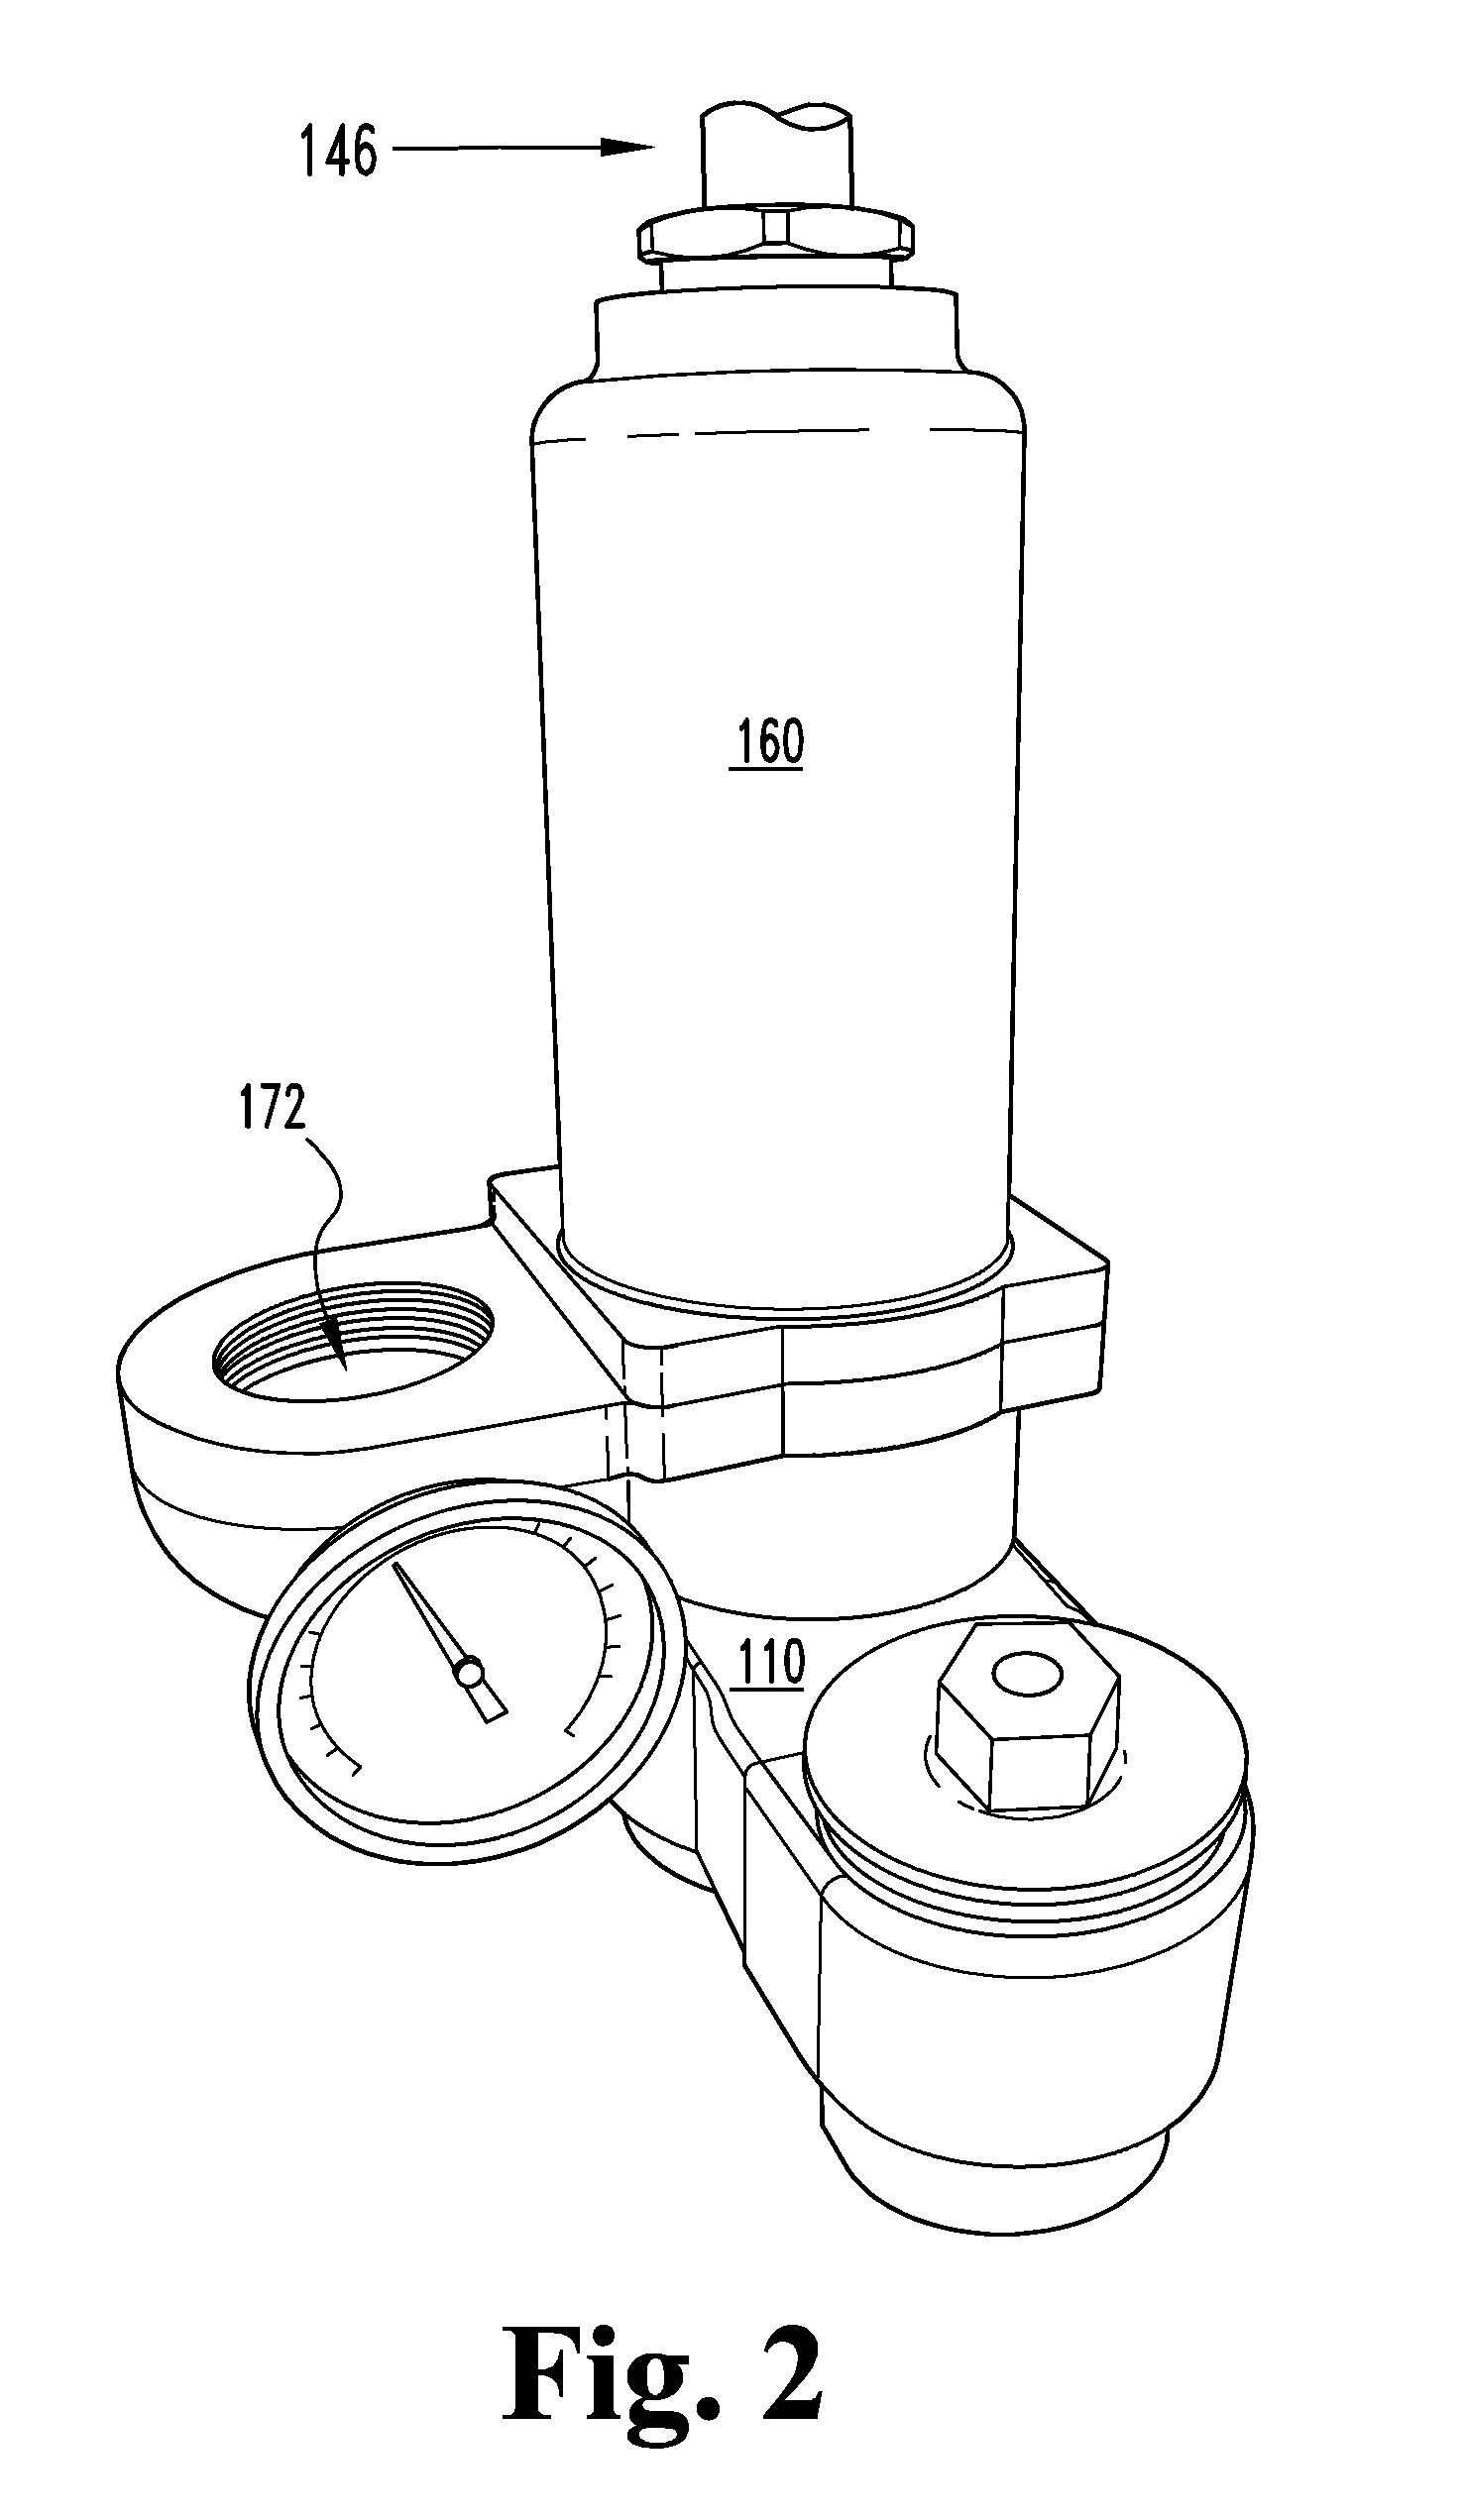 Methods and apparatus for creating turbulence in a thermostatic mixing valve